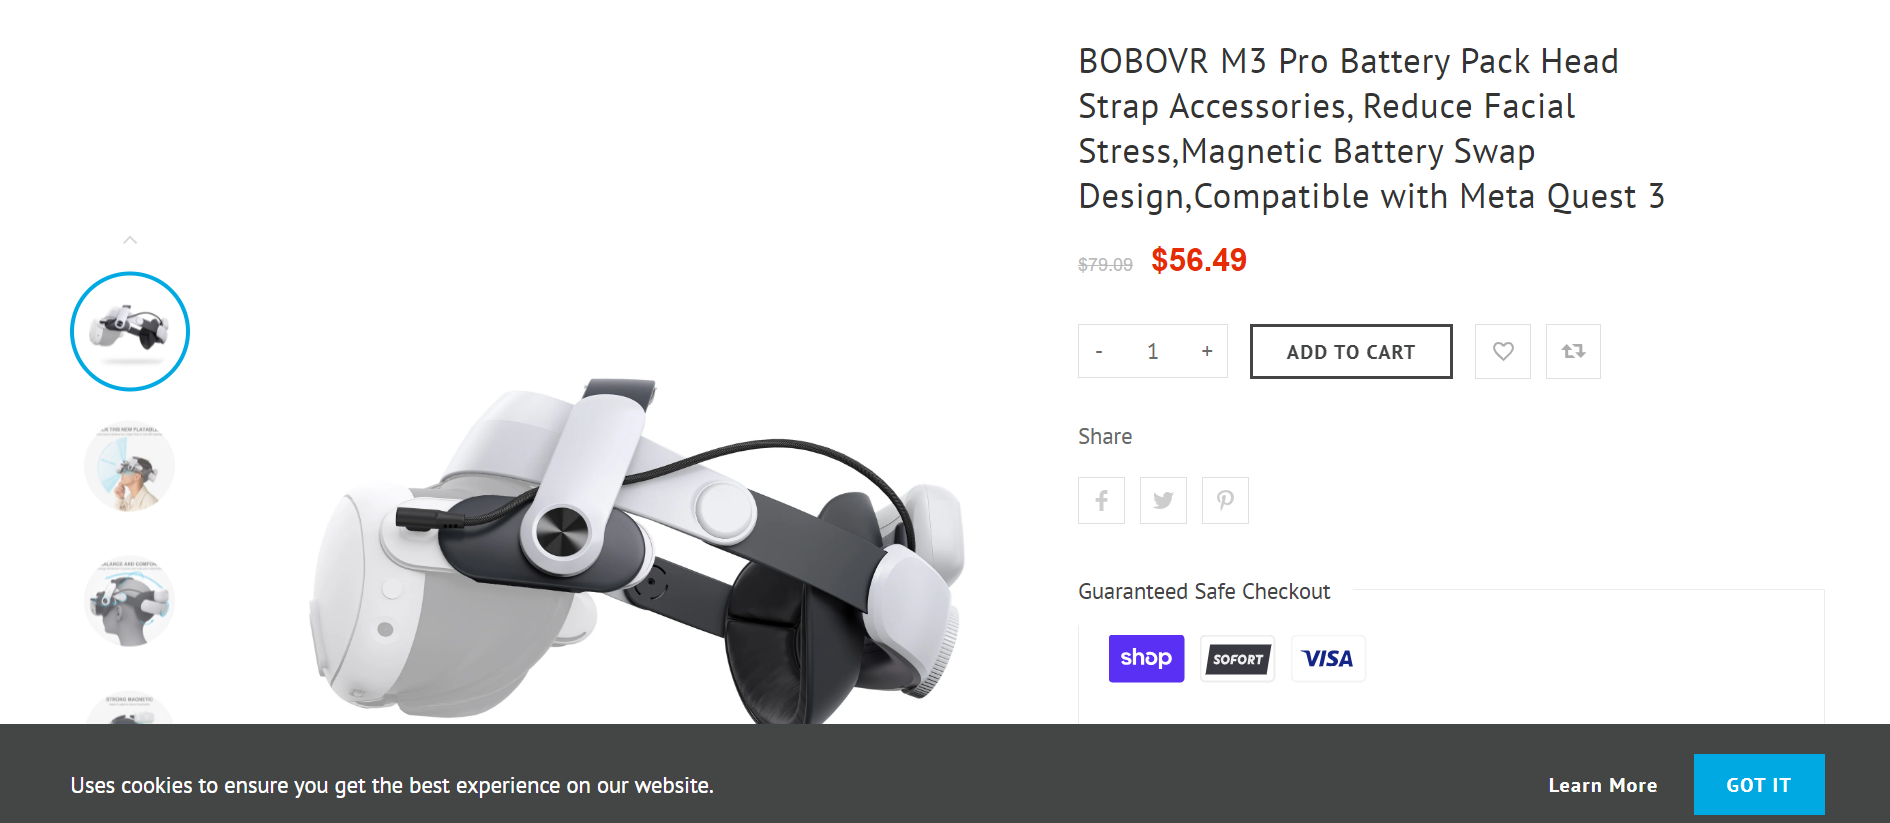 BOBOVR M3 Pro Battery Pack Head Strap Accessories, Reduce Facial Stres -  video gaming - by owner - electronics media